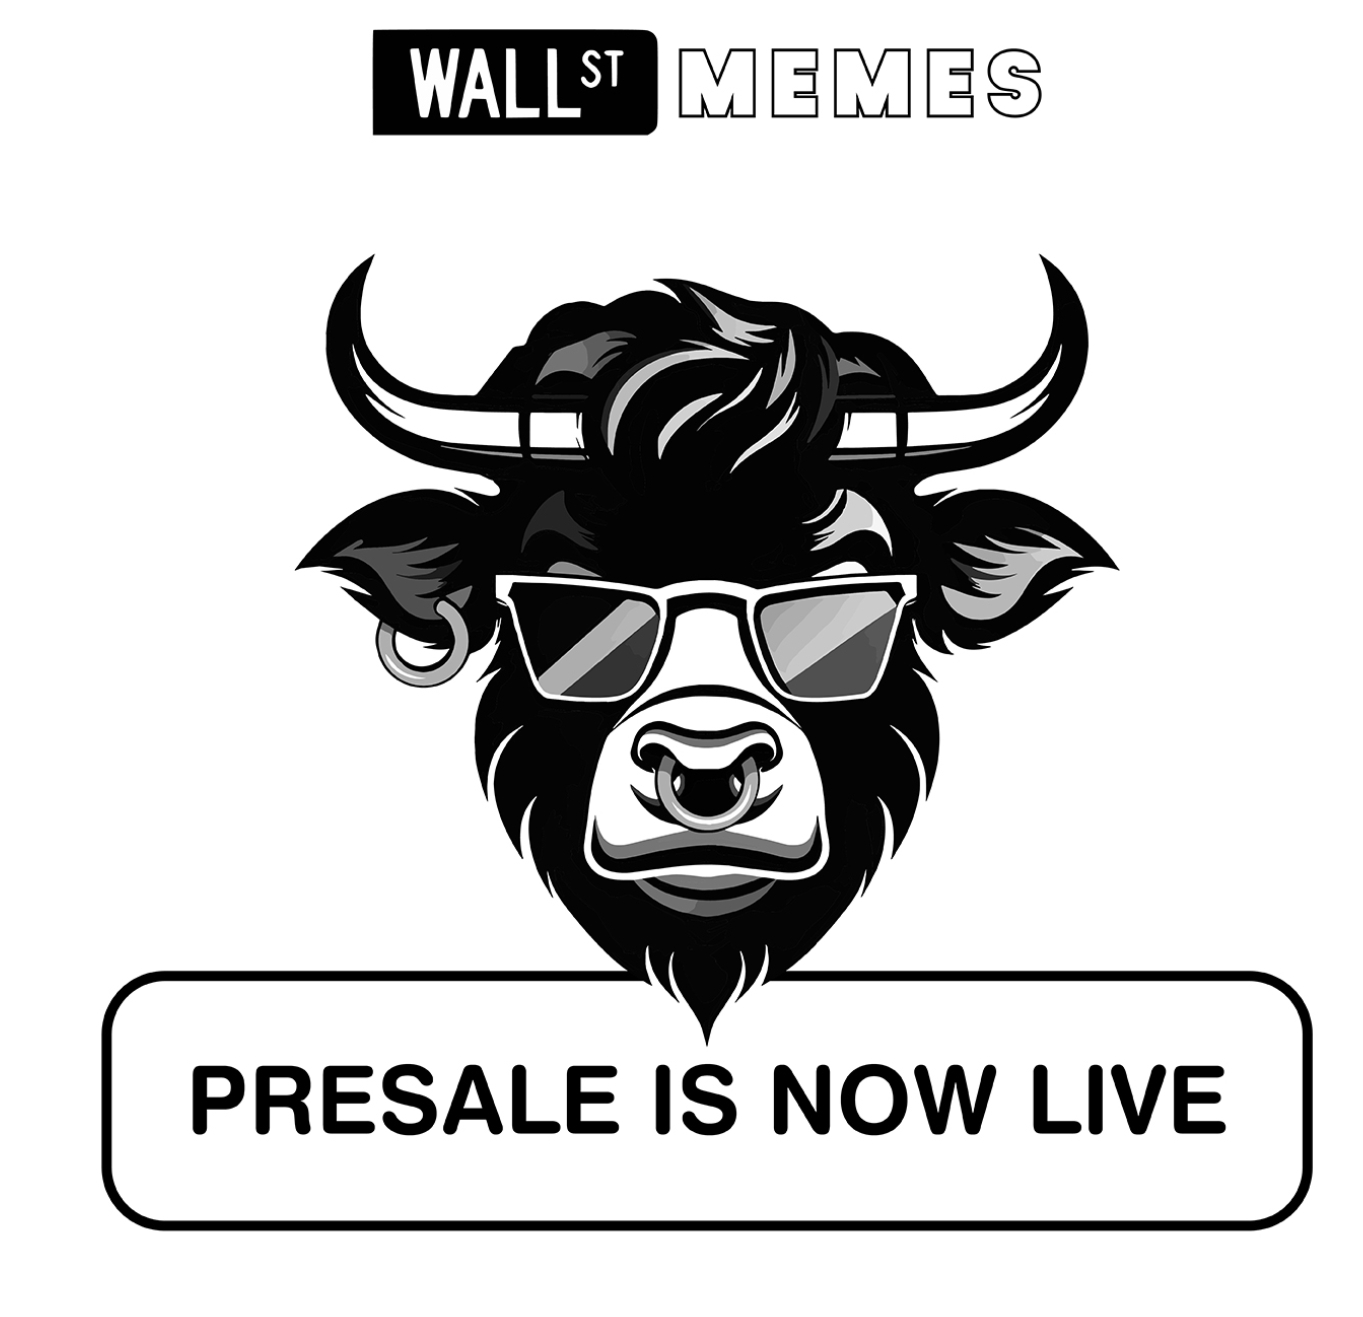 Check out Wall Street Memes